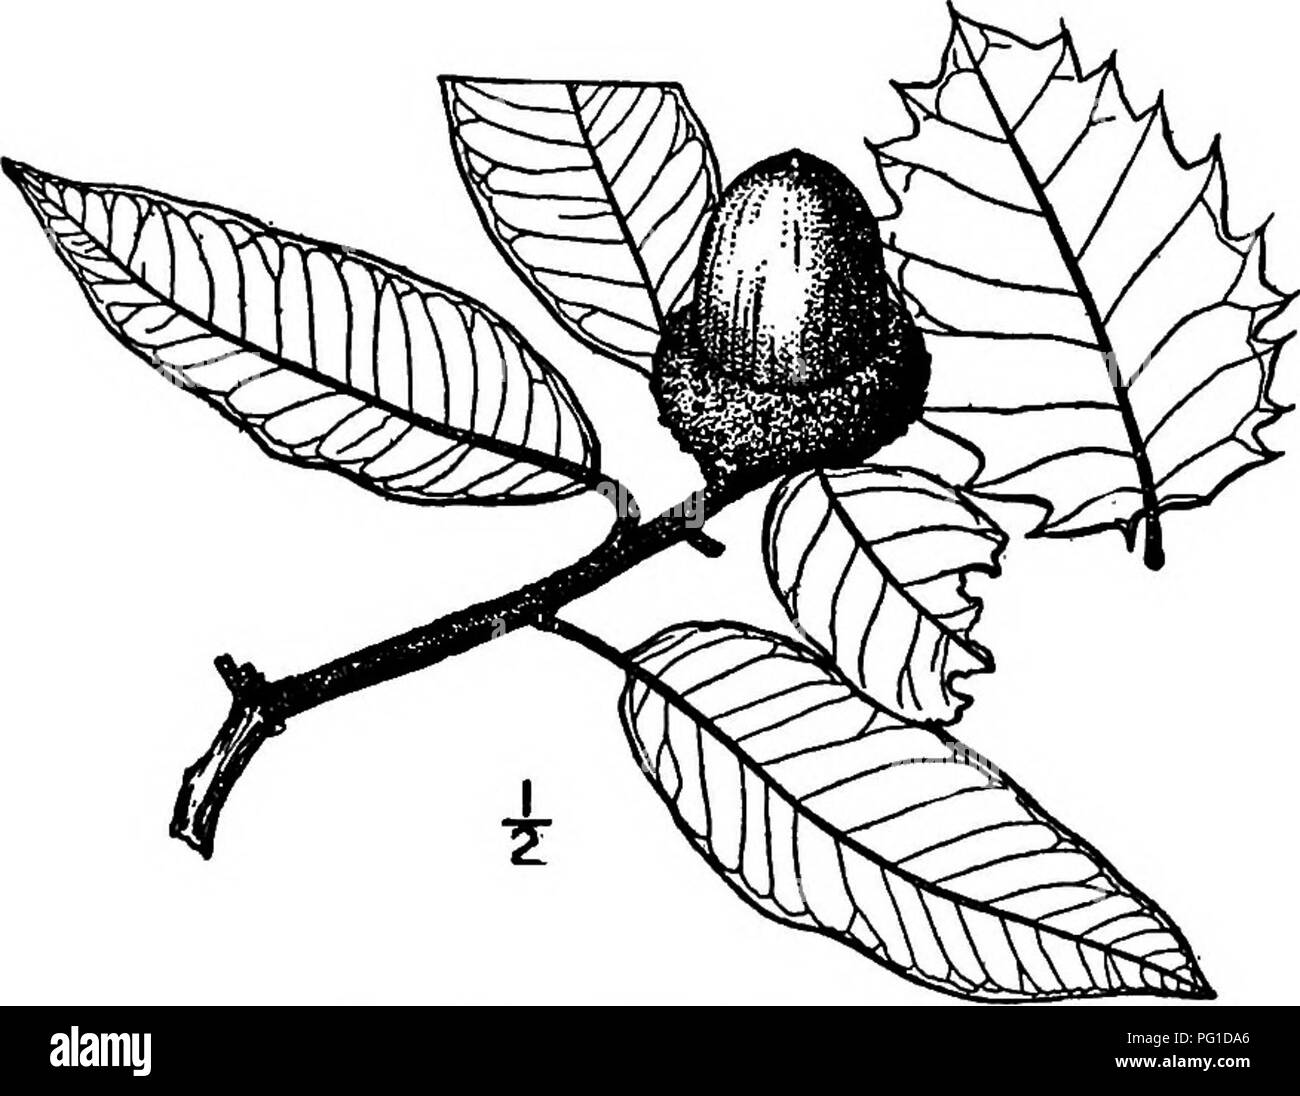 . North American trees : being descriptions and illustrations of the trees growing independently of cultivation in North America, north of Mexico and the West Indies . Trees. Island Oak 3&quot; small, close reddish gray or brown scales. The twigs are stiff and slender, hairy at first, becoming smooth or nearly so, and brown or light gray. The winter buds are broadly ovoid to oval, sharp-pointed, about 3 nrni. long and brown. The leaves are oblong, elliptic to lanceolate, 2.5 to 10 cm. long, sharp and stiff-pointed, heart-shaped, rounded or wedge-shaped at the base; the thick, revolute margin i Stock Photo